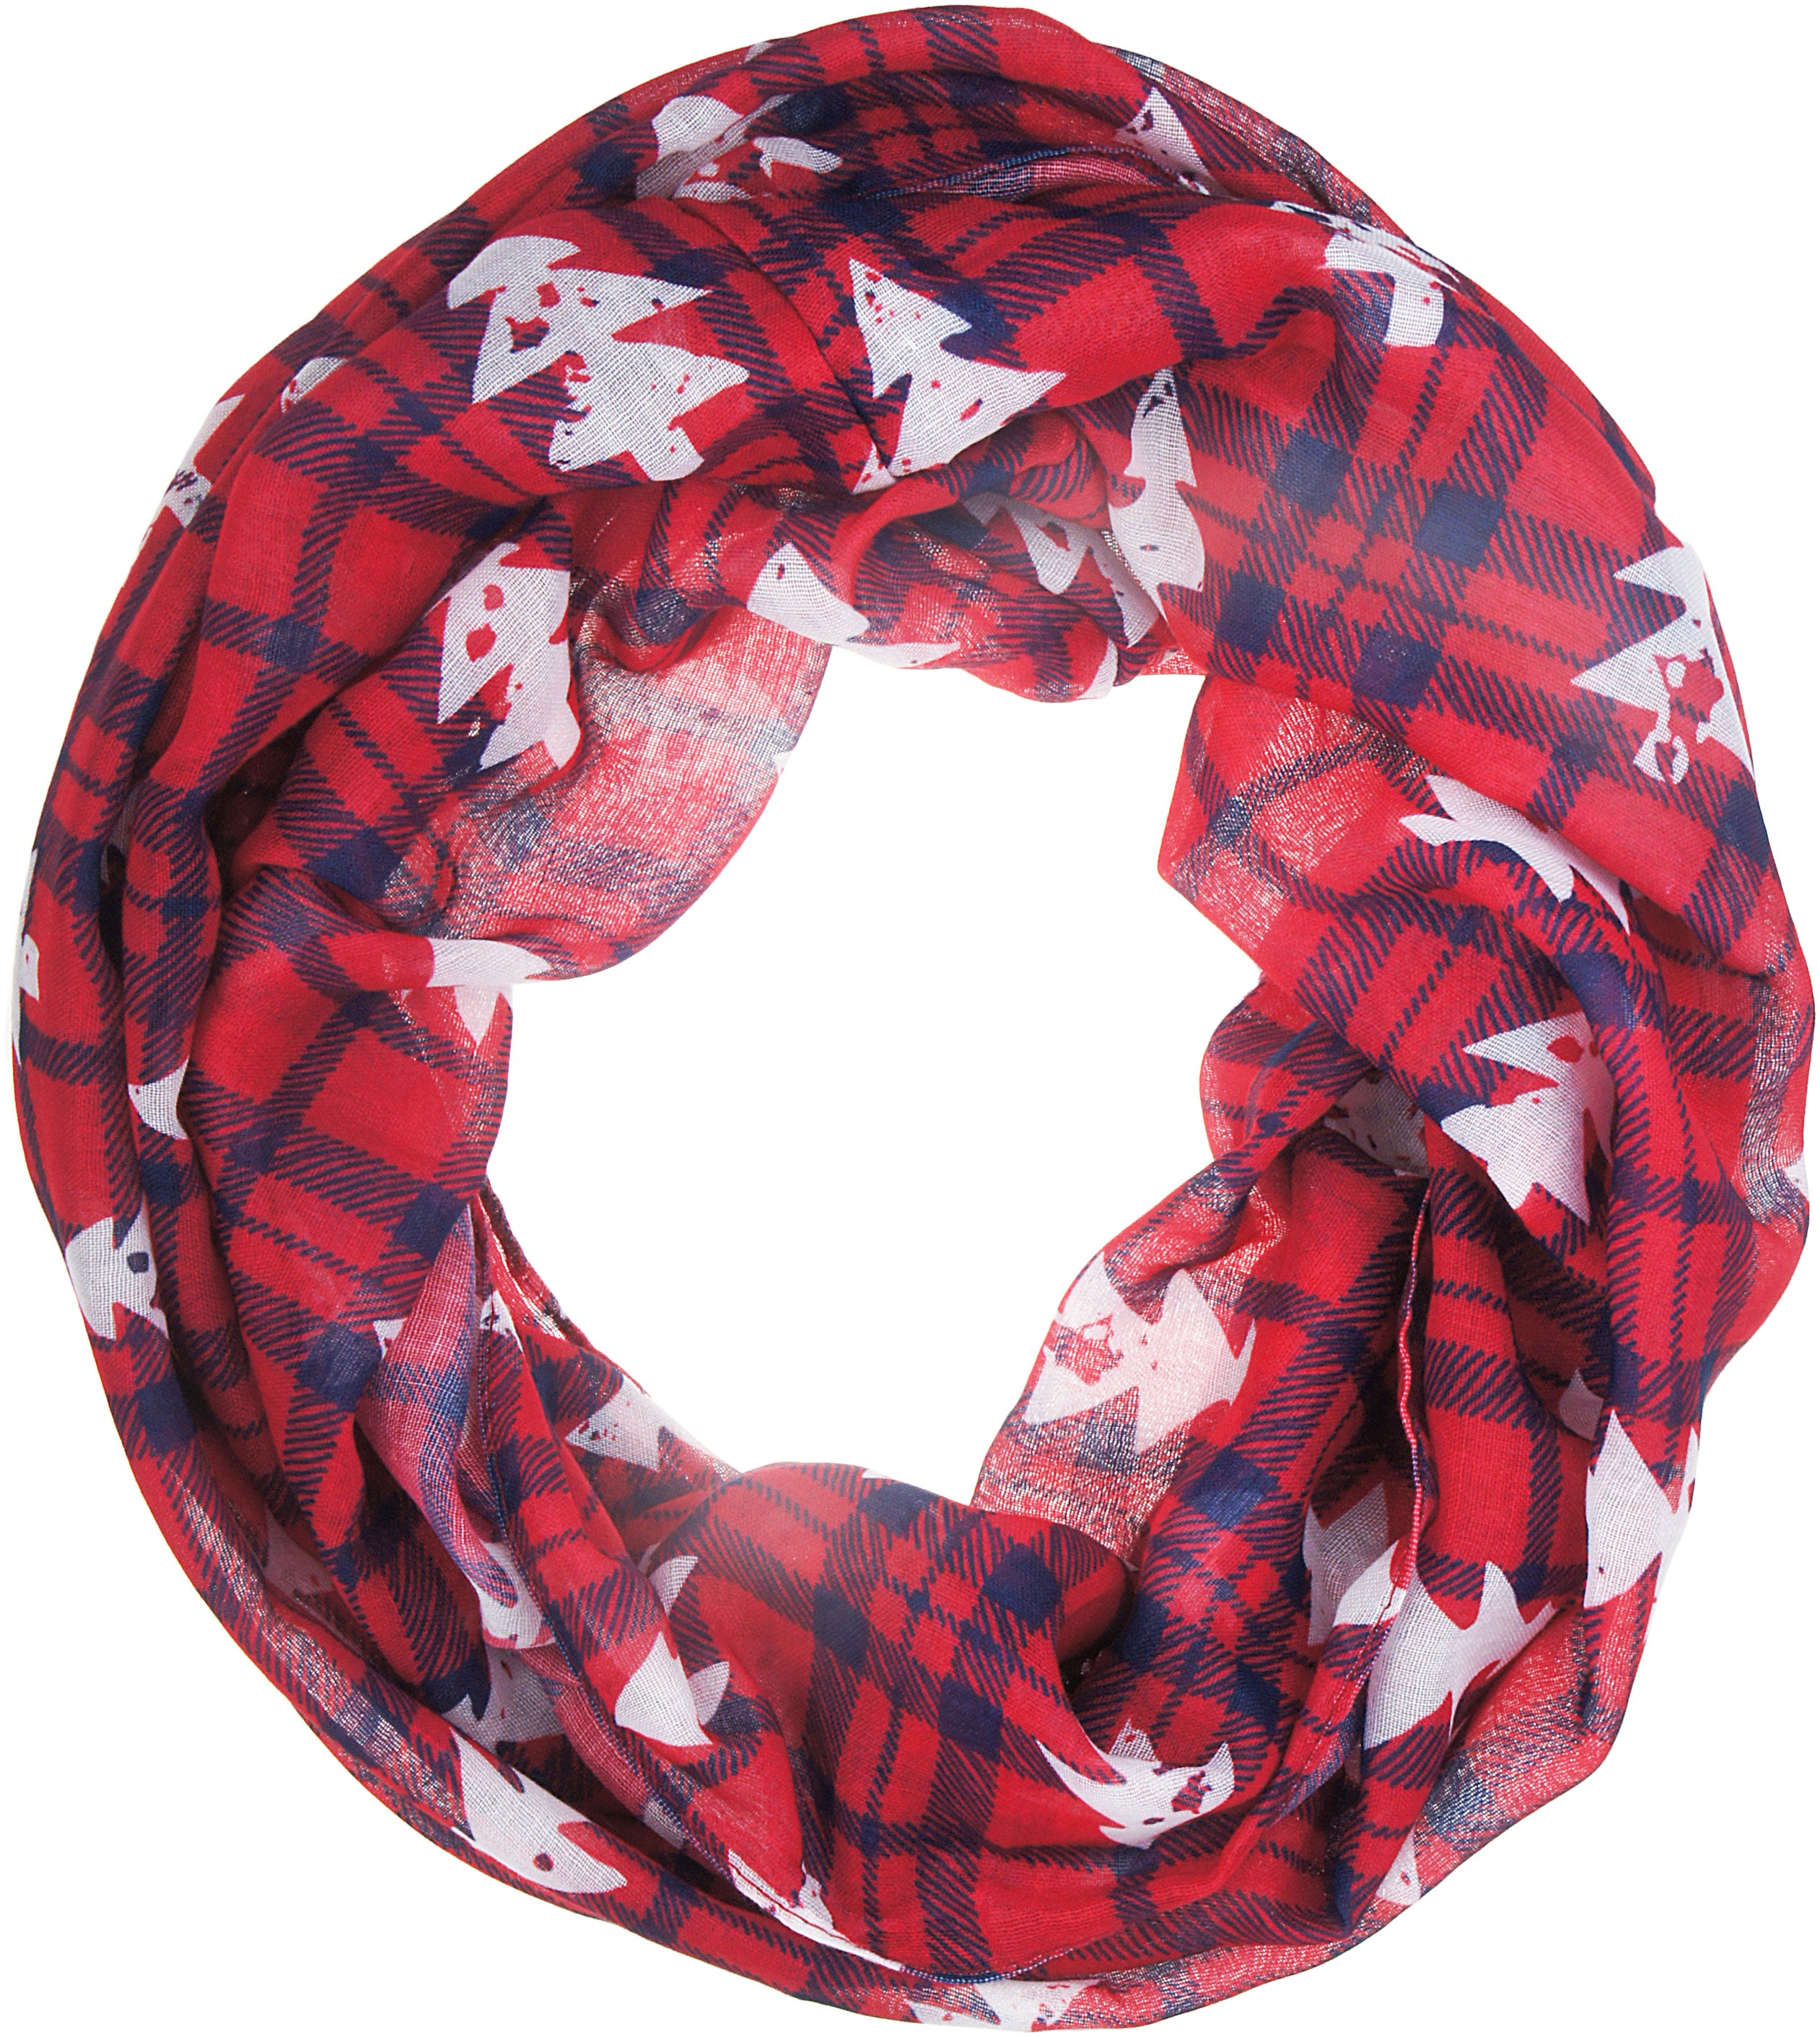 Soft Lightweight Christmas Holiday Sheer Infinity Scarf for Women Girls